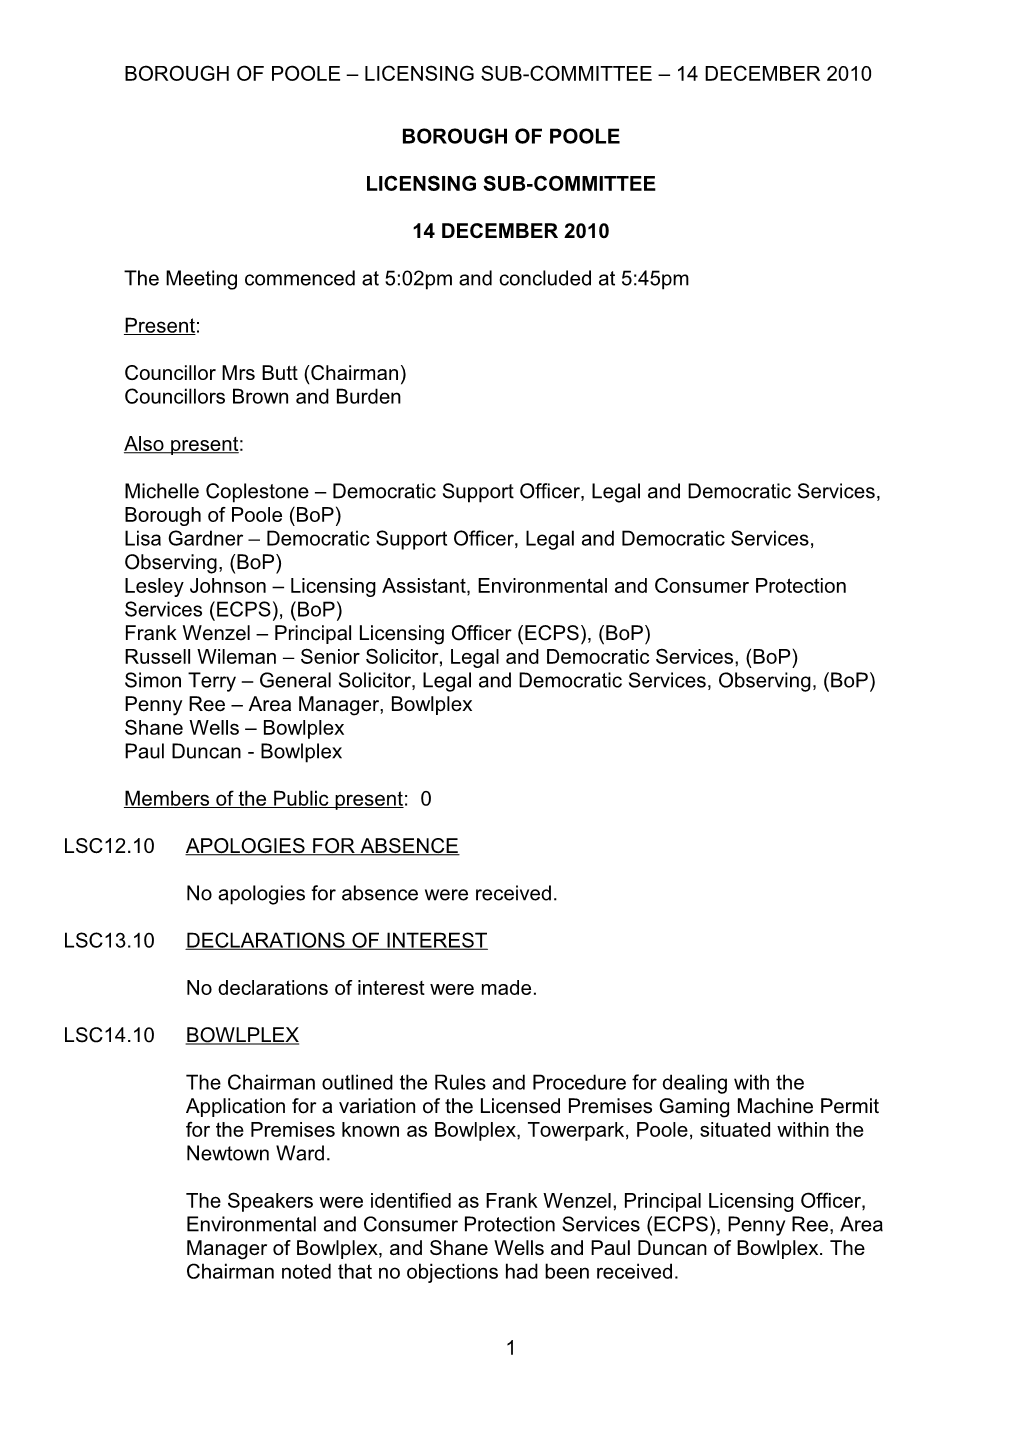 Minutes - Licensing Sub-Committee - 14 December 2010